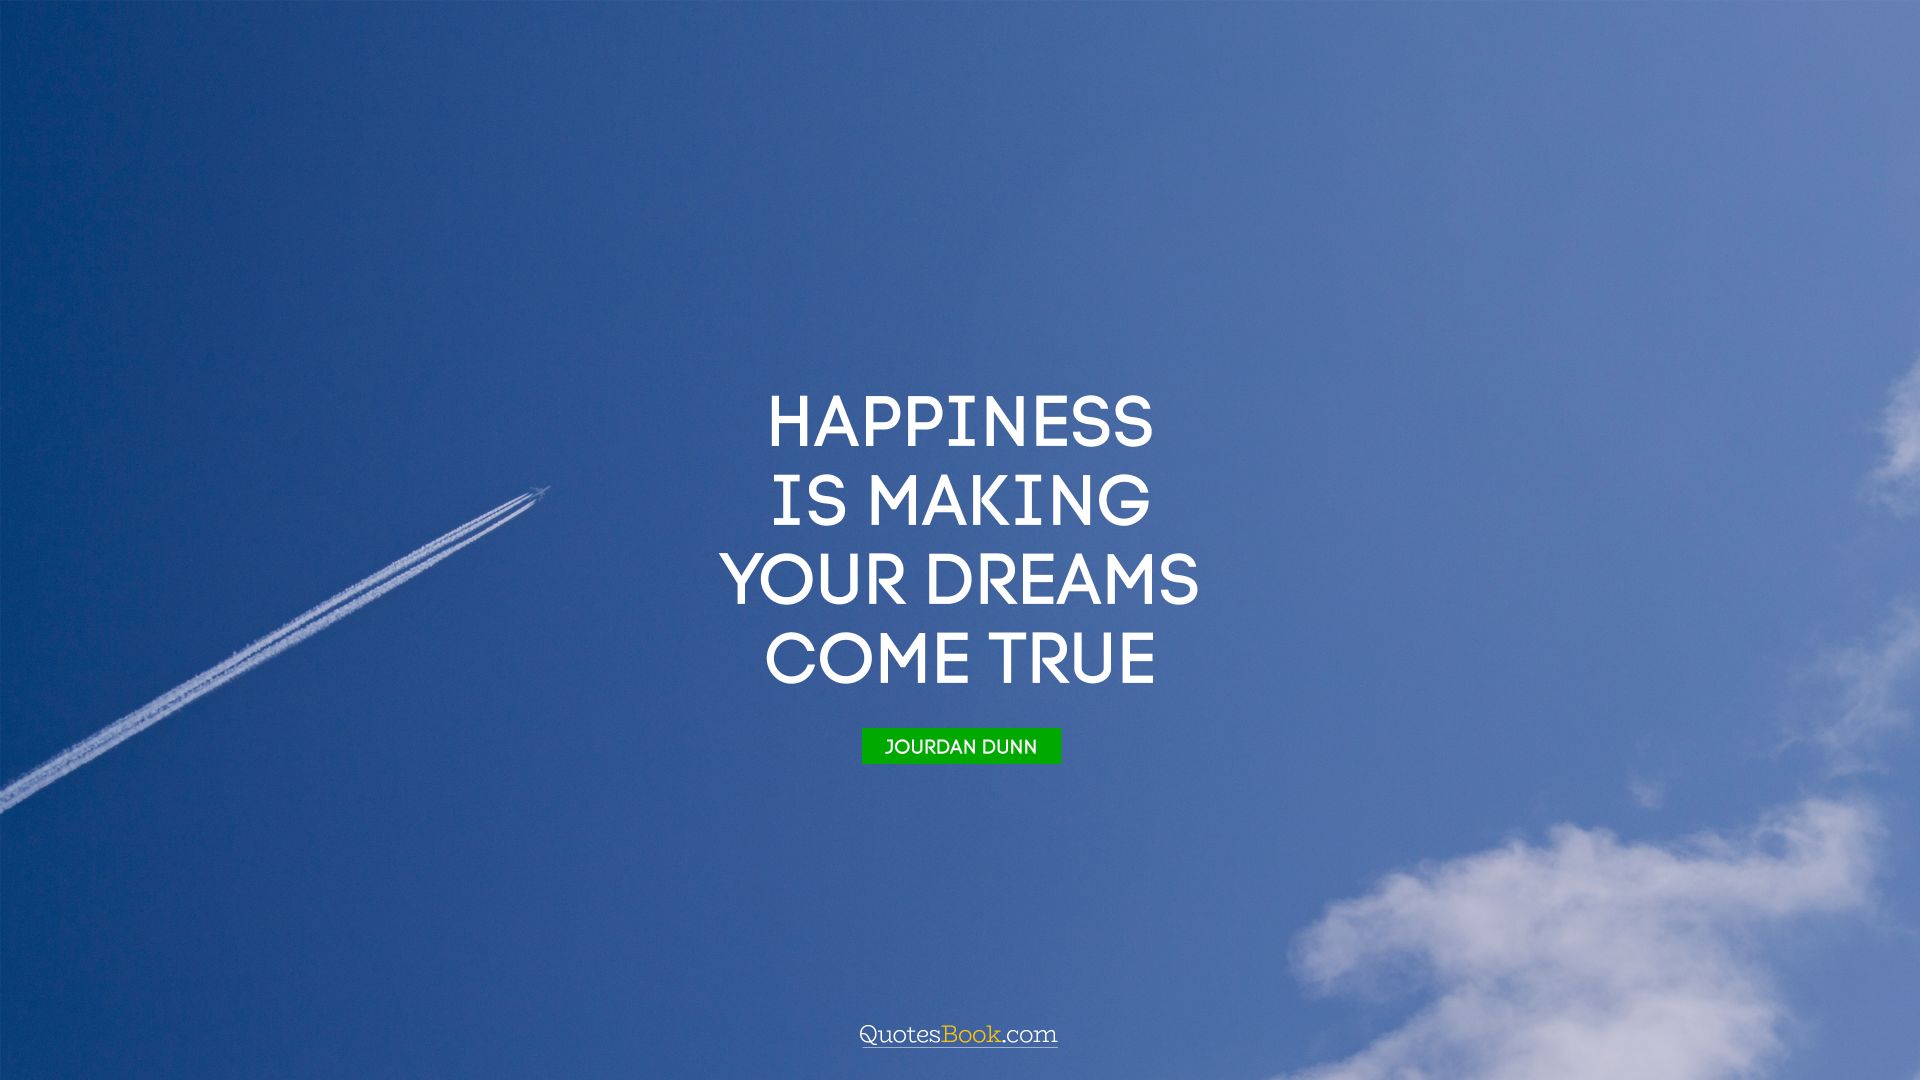 Happiness is making your dreams come true. - Quote by Jourdan Dunn